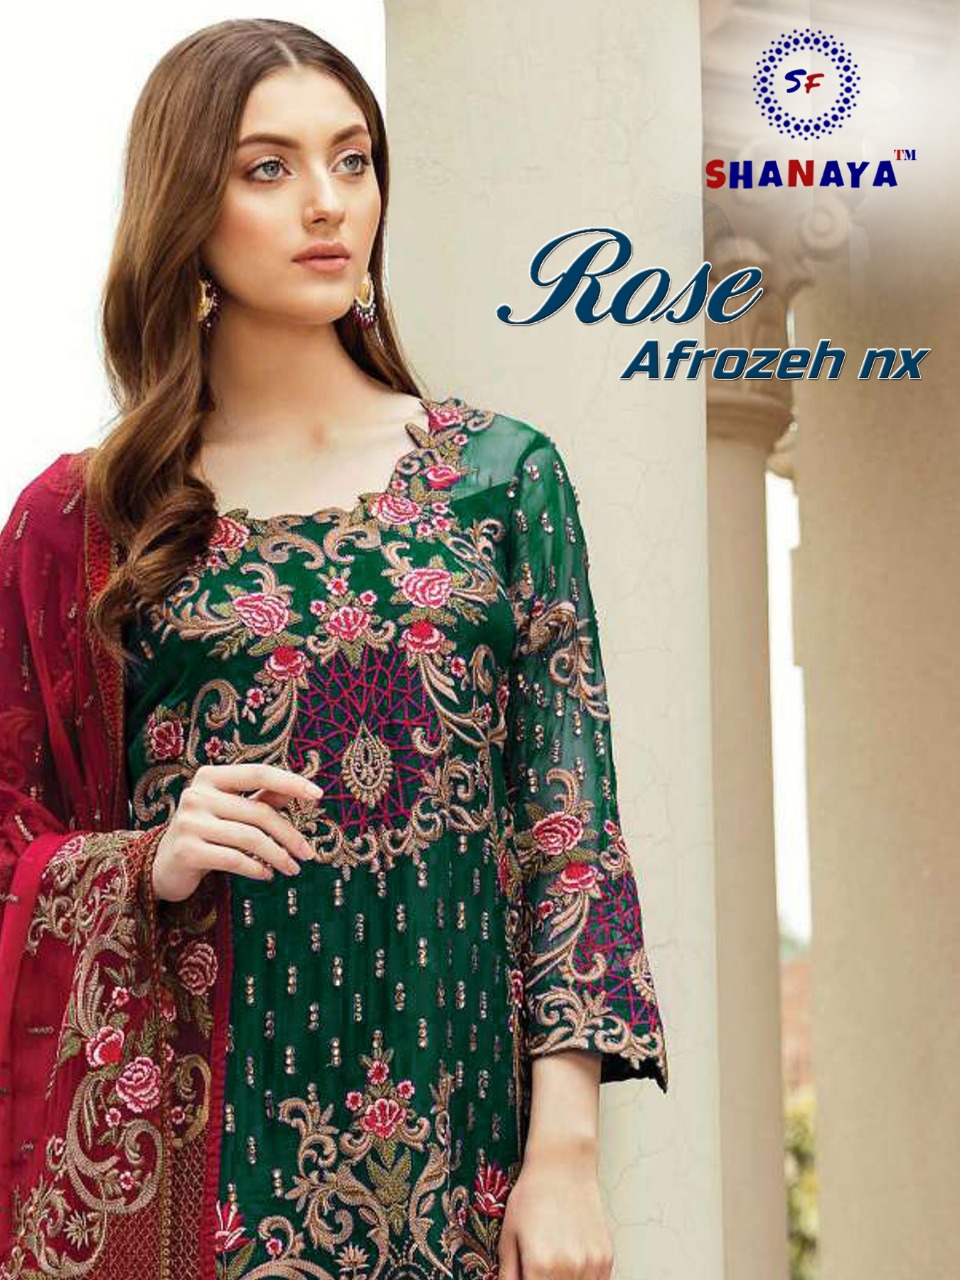 Shanaya Fashion Rose afrozeh Nx classy catchy look Pakistani concept Salwar suits in wholesale prices